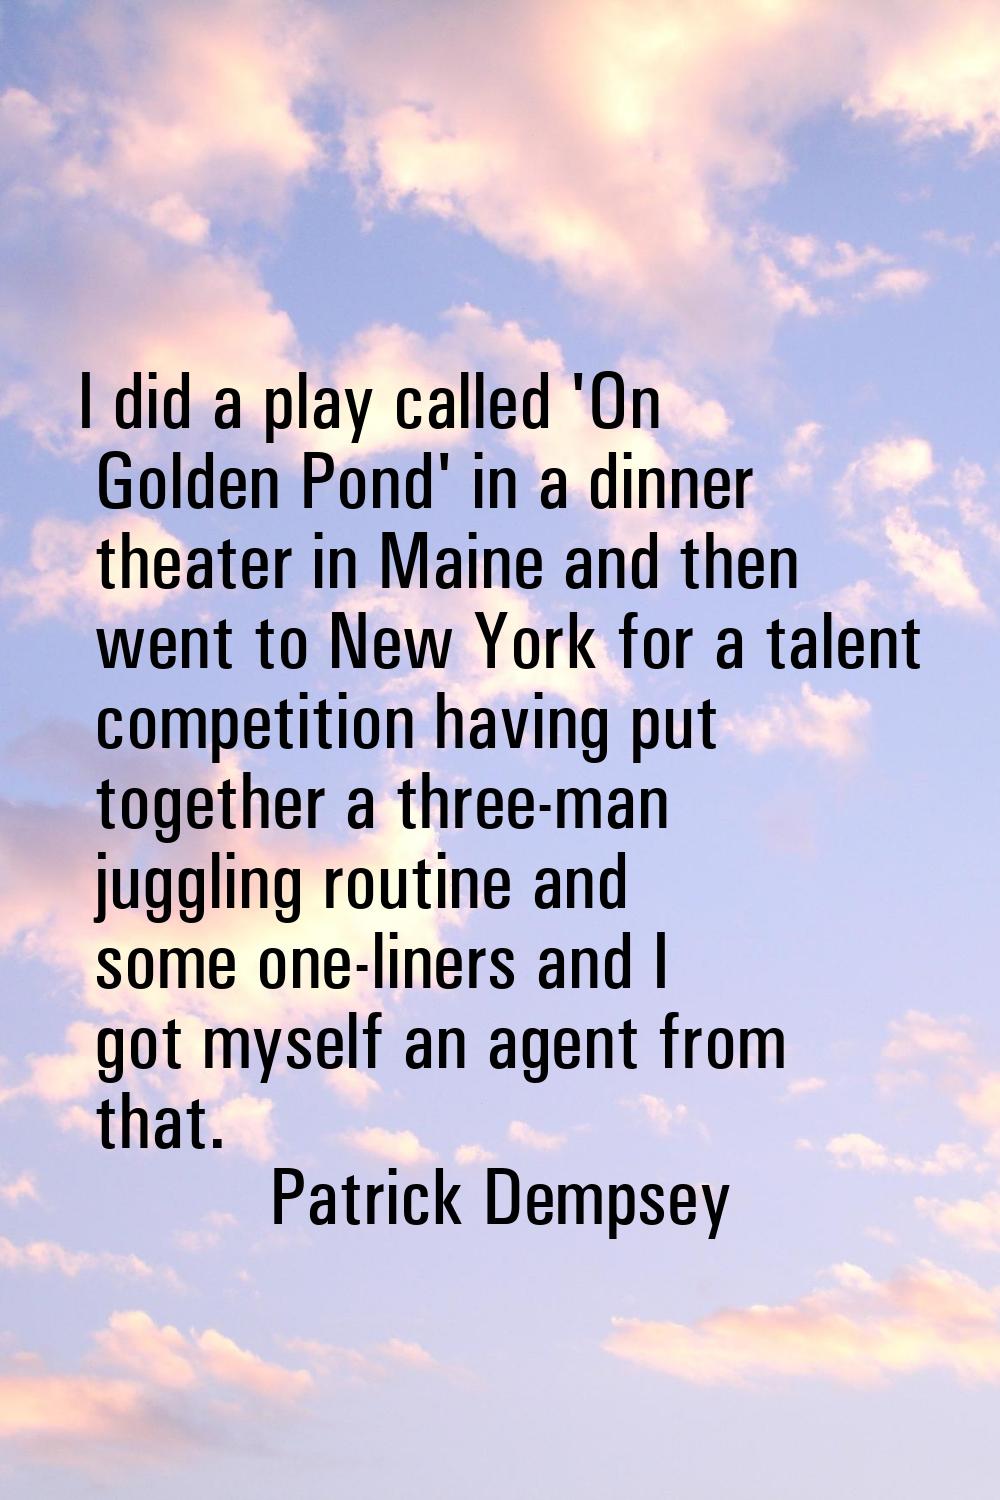 I did a play called 'On Golden Pond' in a dinner theater in Maine and then went to New York for a t